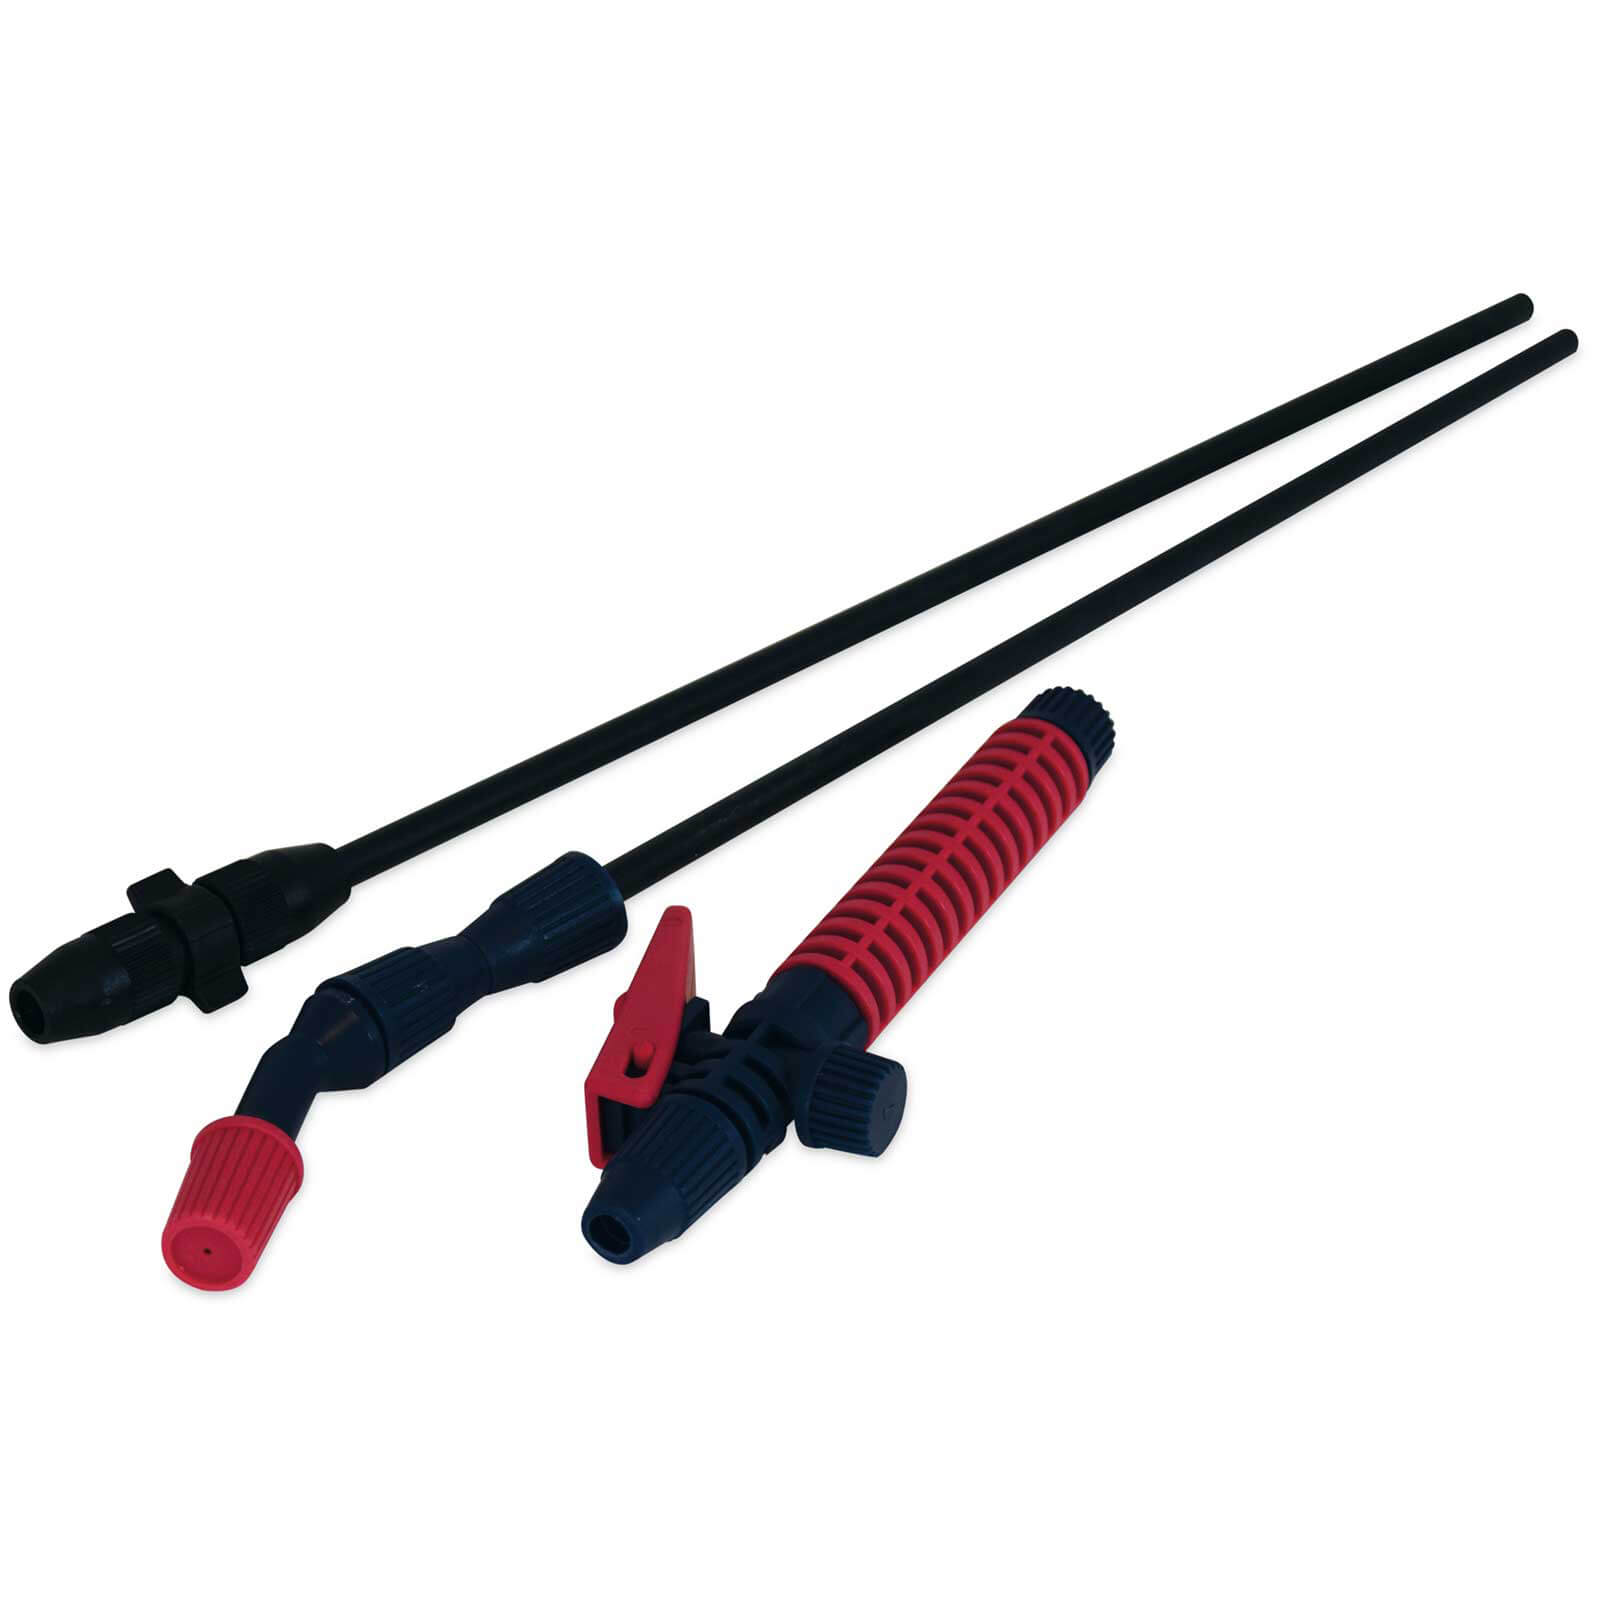 Spear and Jackson Extendable Lance for 5 and 8 Litre Pressure Sprayers